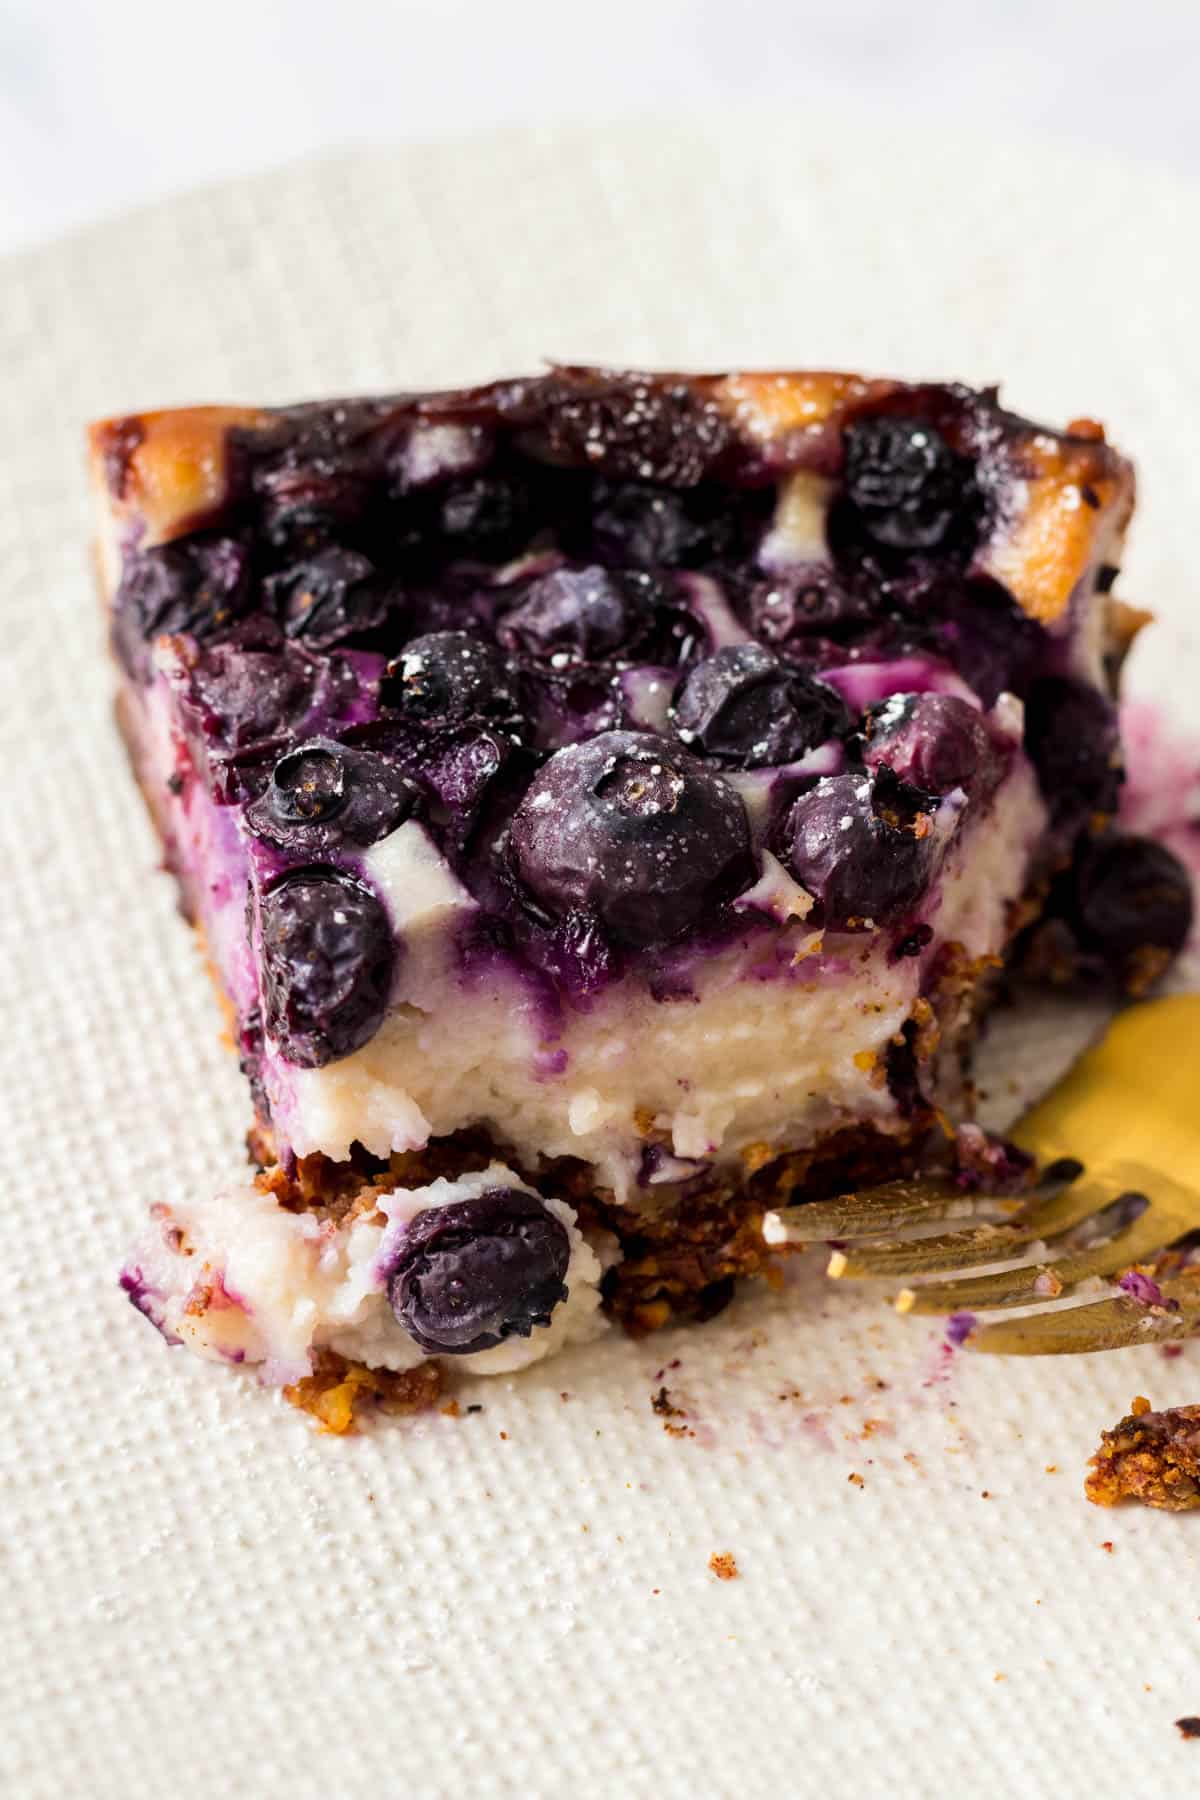 Slice of blueberry cheesecake with bites taken out.